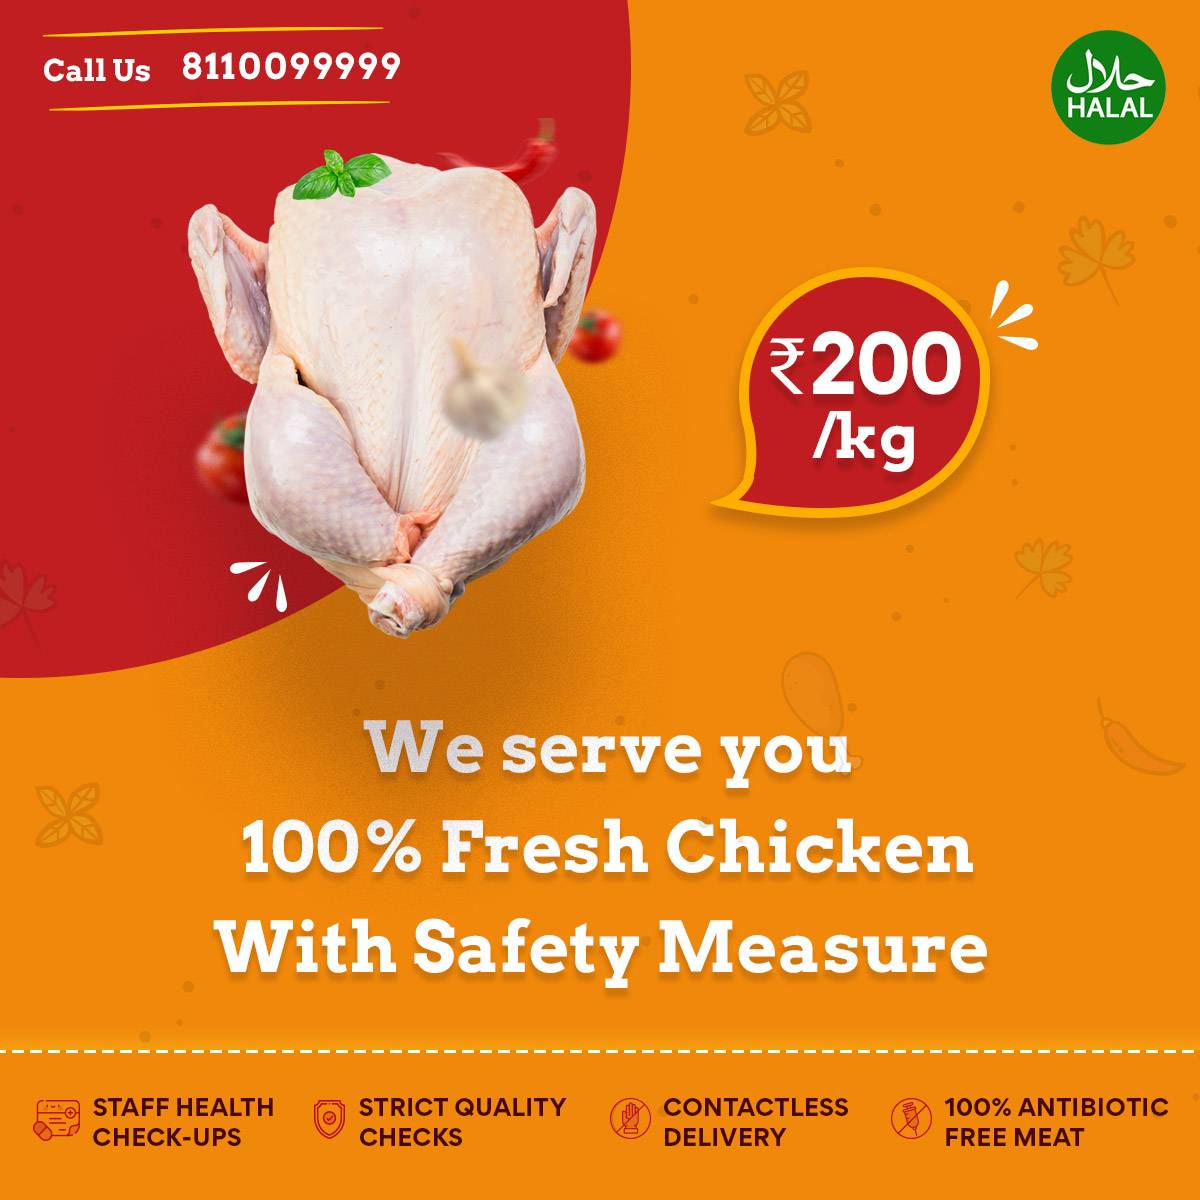 Buy Chicken Online | Home Delivery in 90 minutes | Royal Chicken